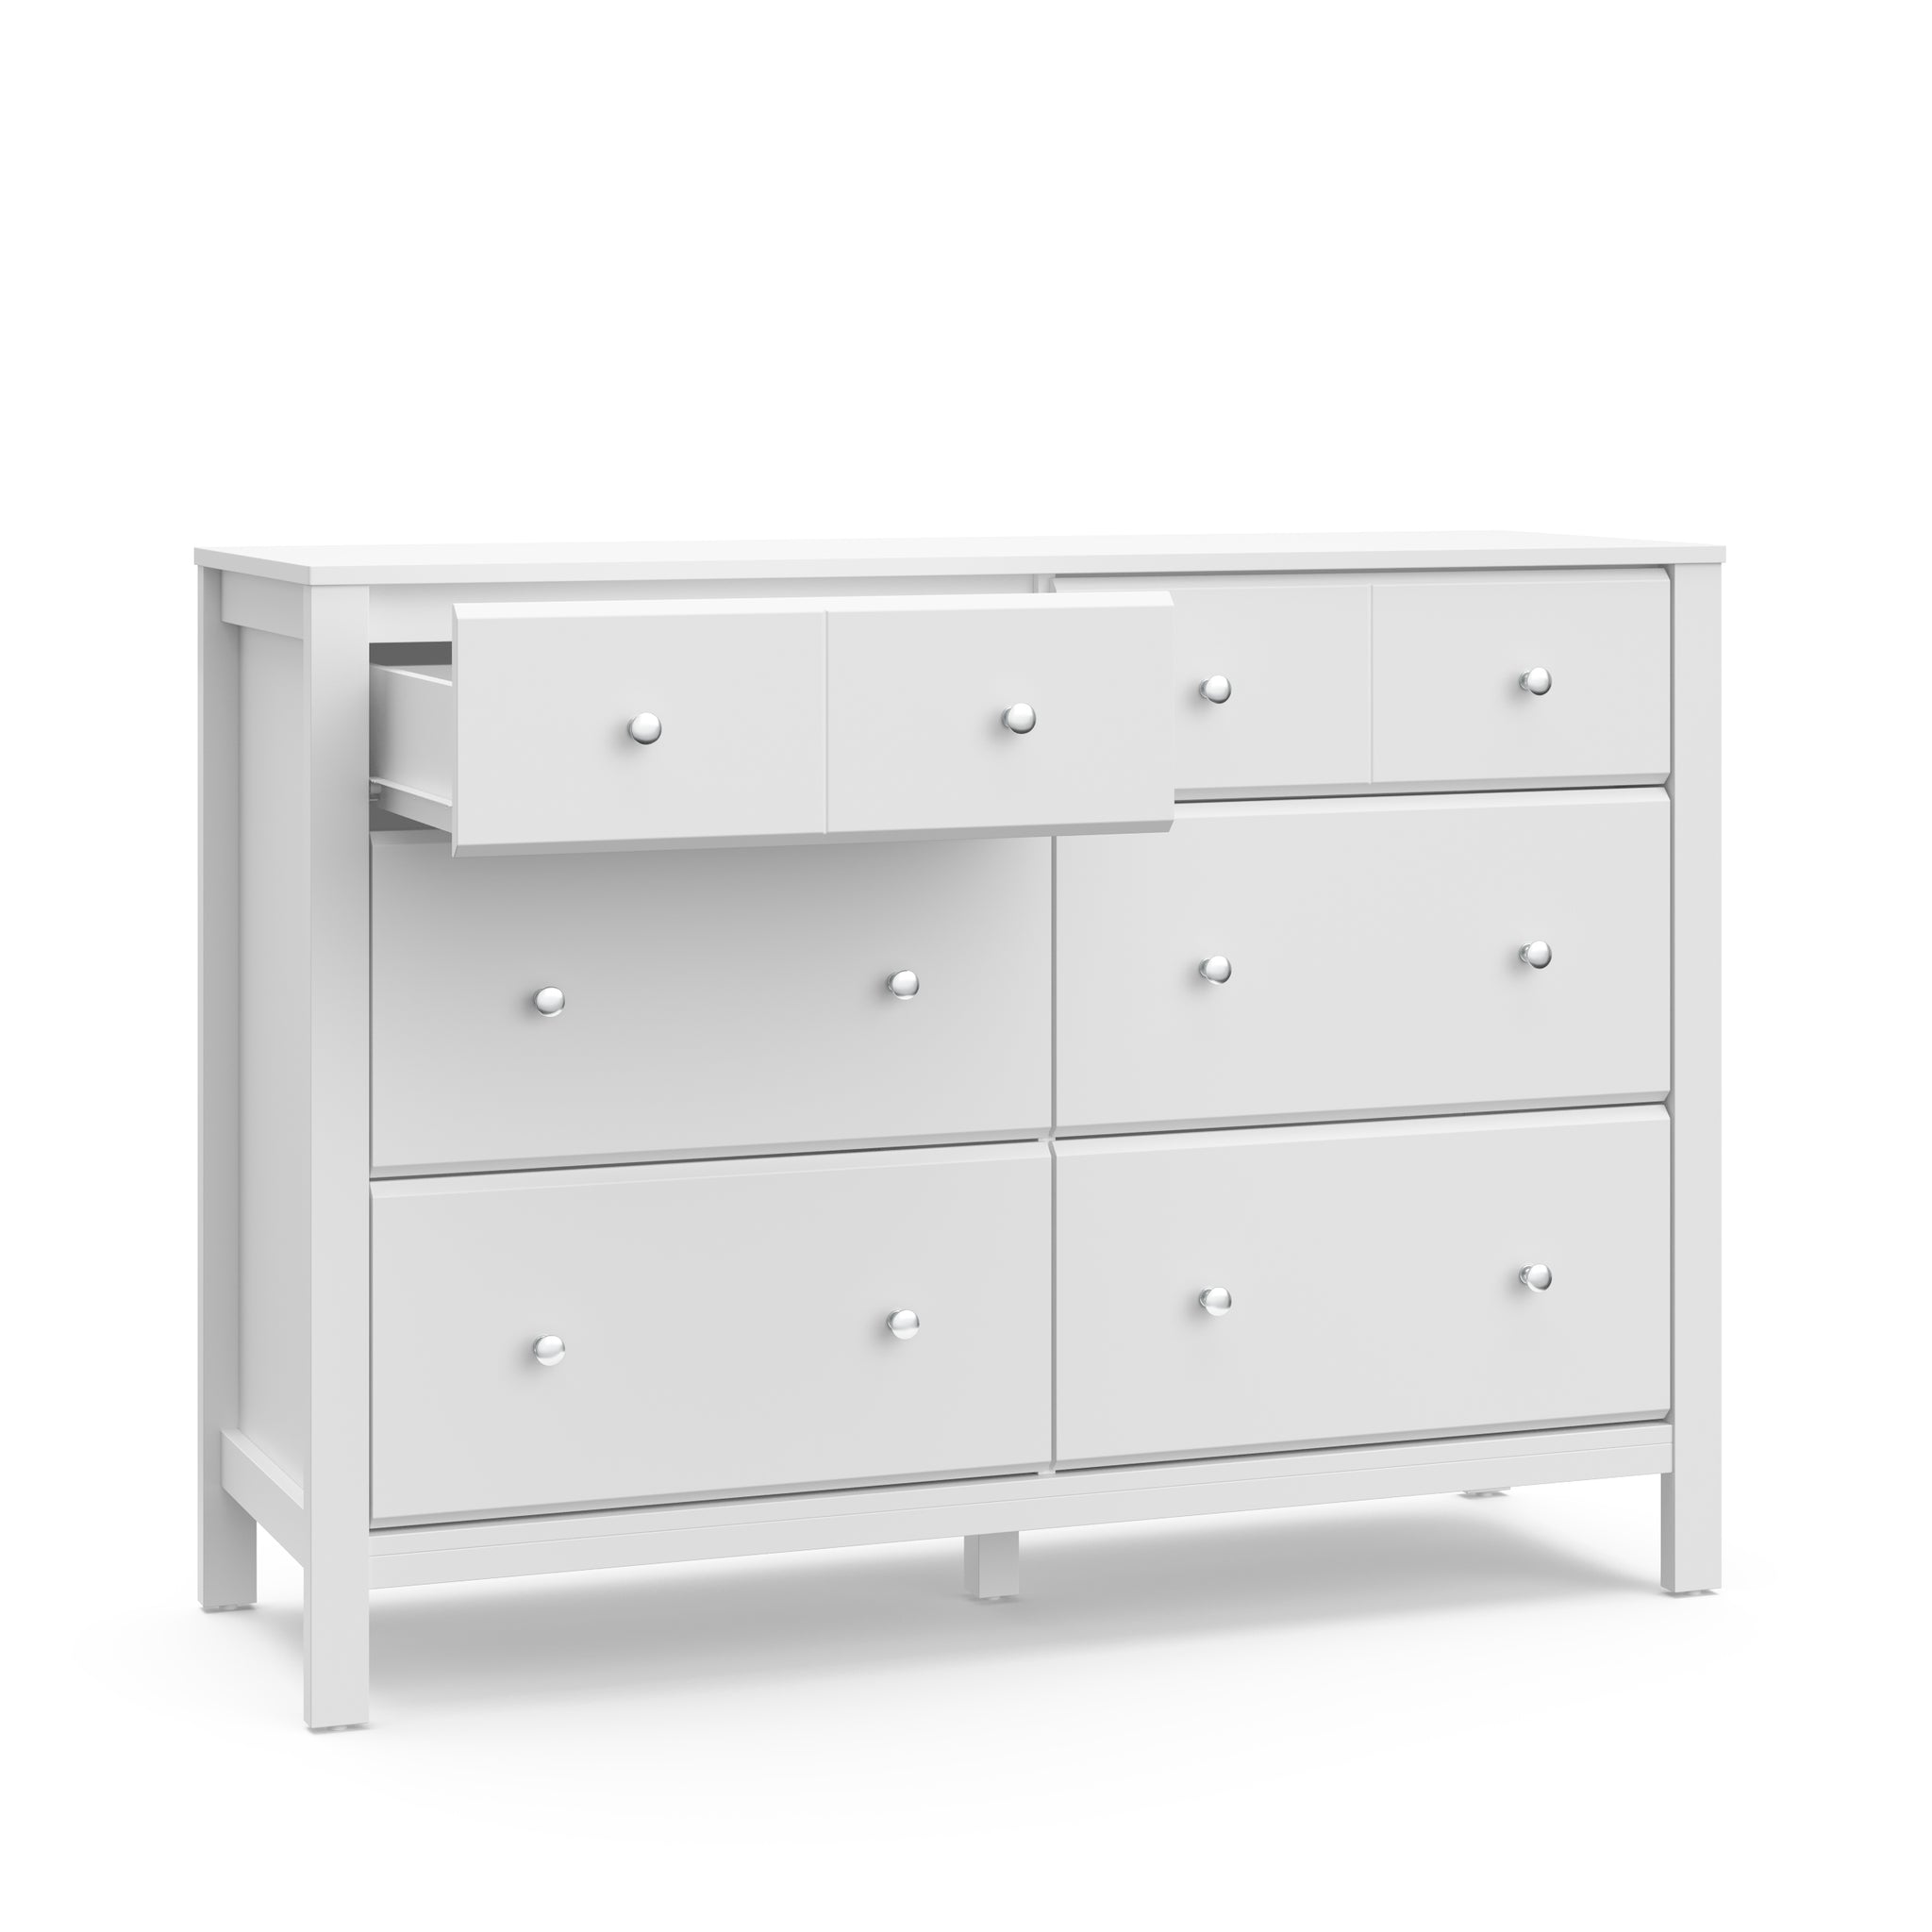 angled view of white 6 drawer dresser with one open drawer